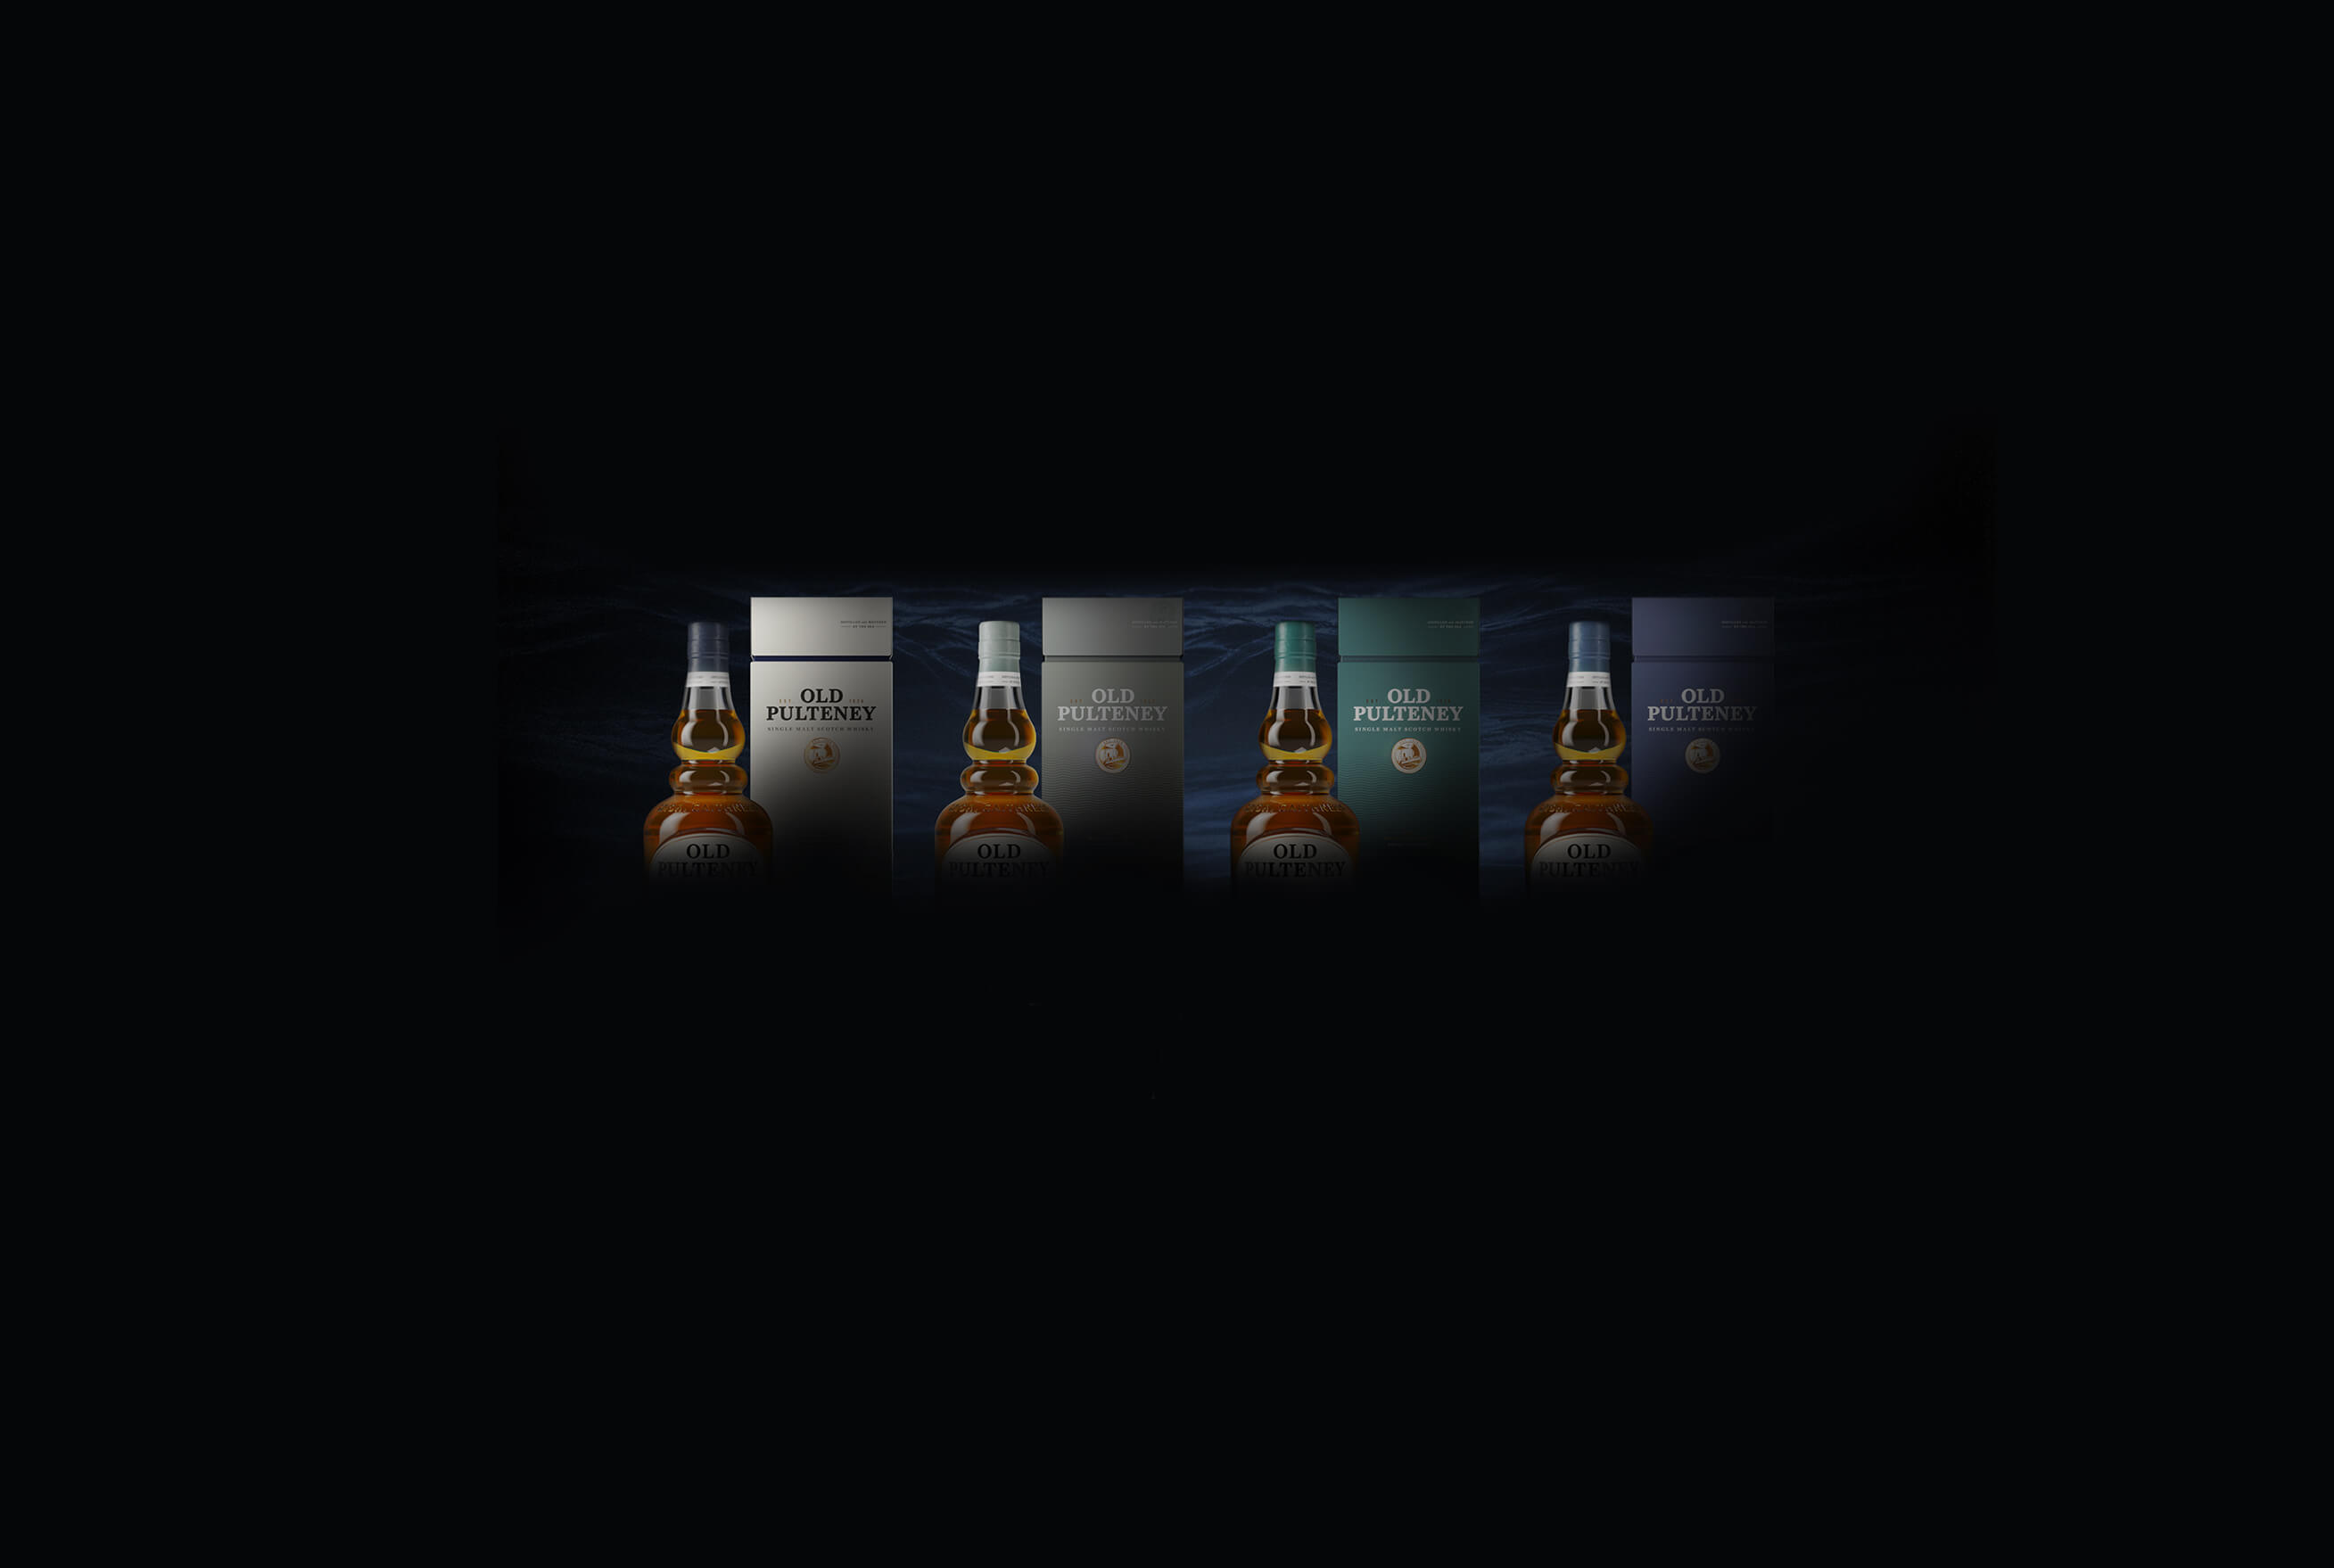 We're setting sail with a new fleet of inspired whiskies